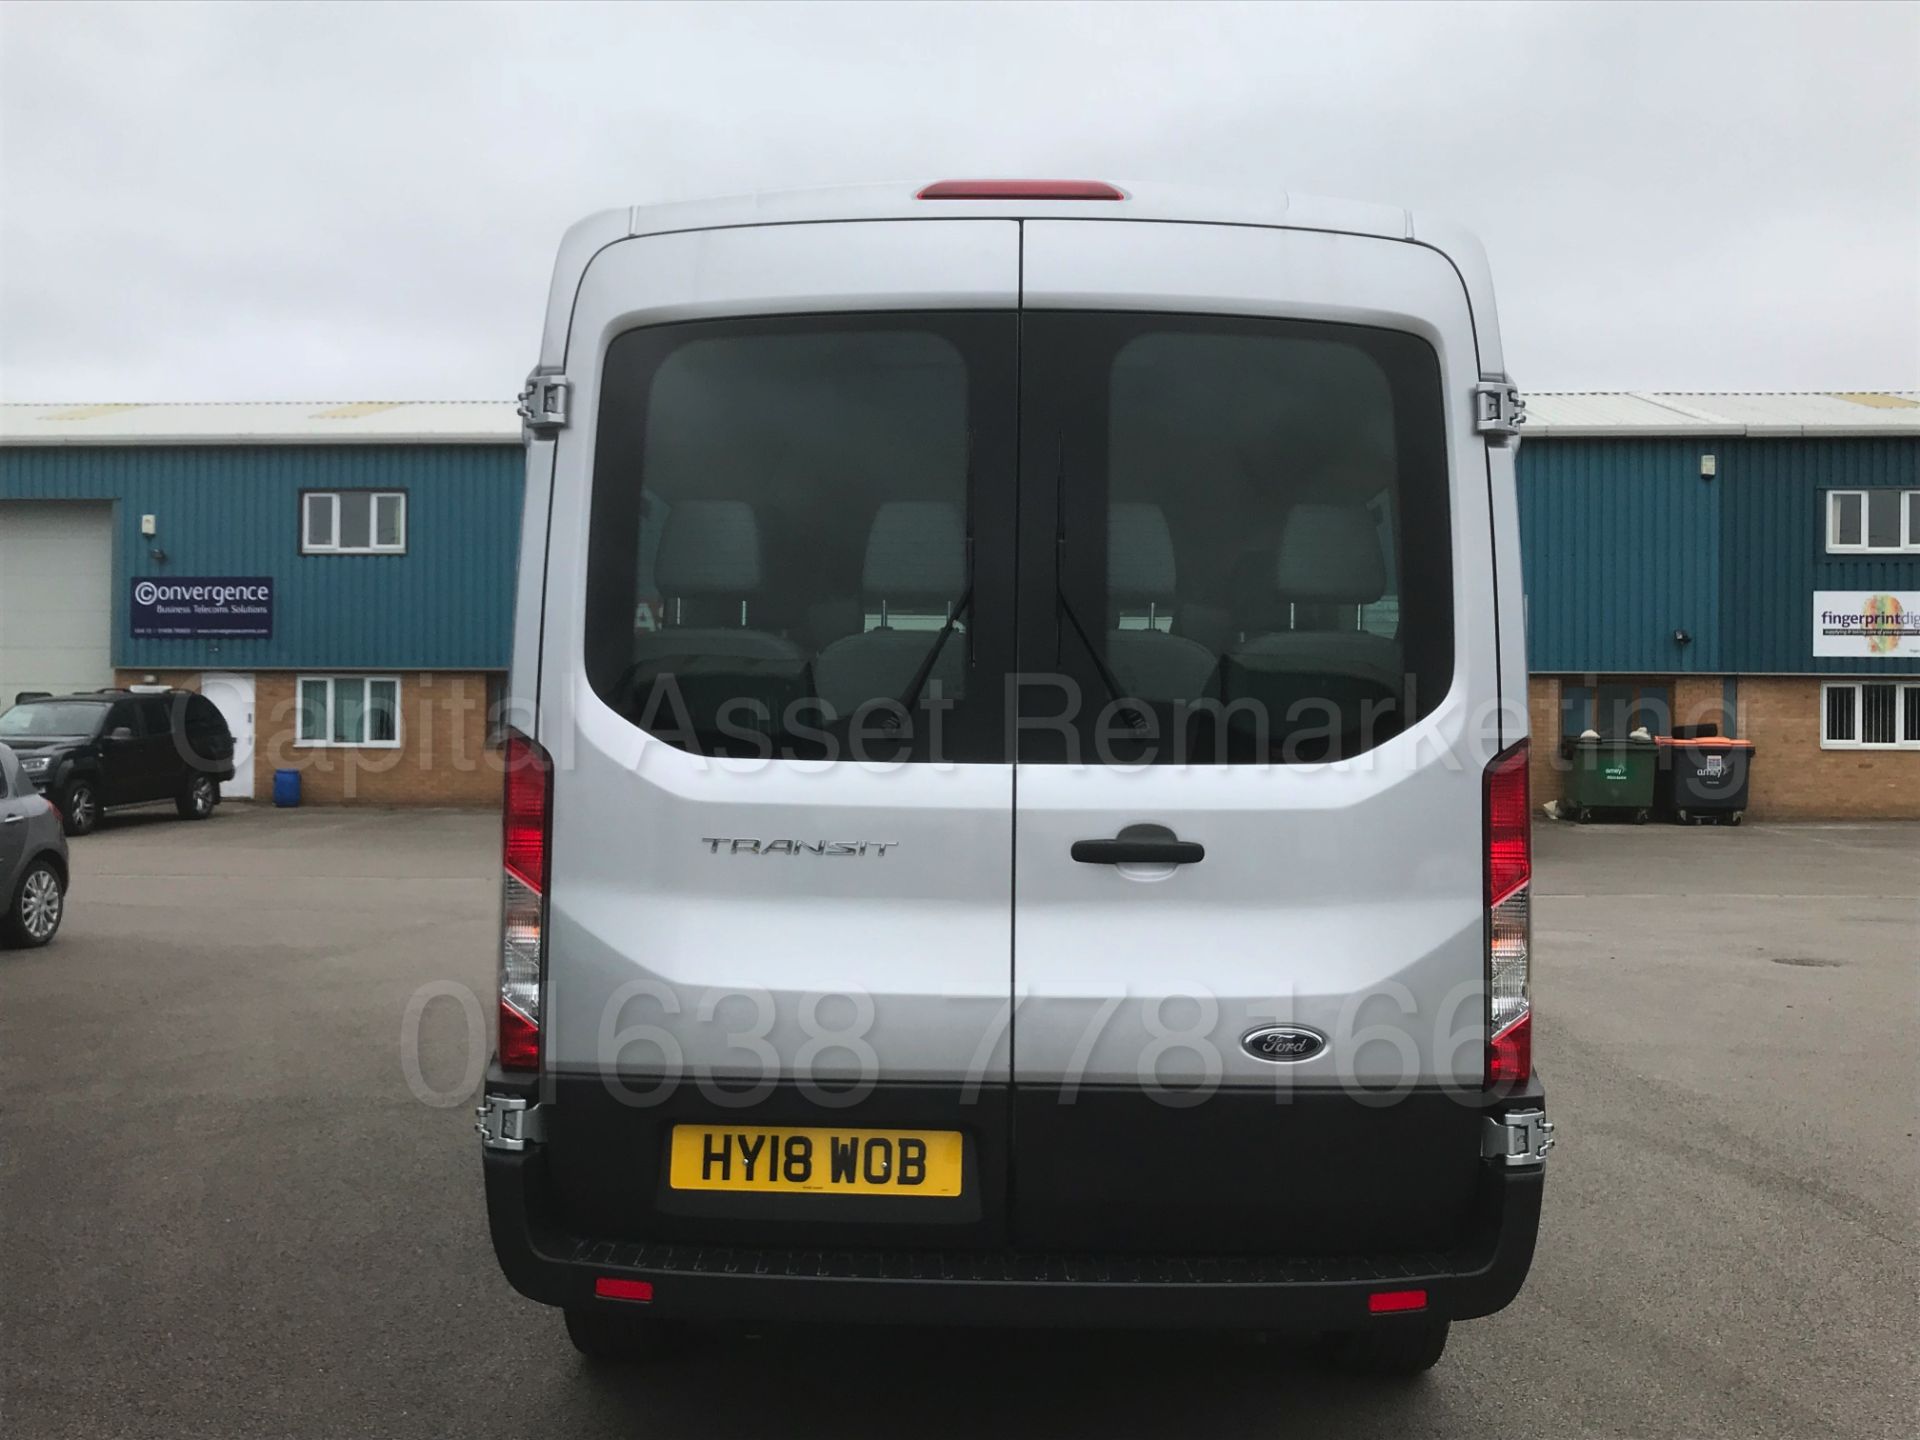 (On Sale) FORD TRANSIT LWB '15 SEATER MINI-BUS' (2018) '2.2 TDCI -125 BHP- 6 SPEED' 130 MILES ONLY ! - Image 11 of 50